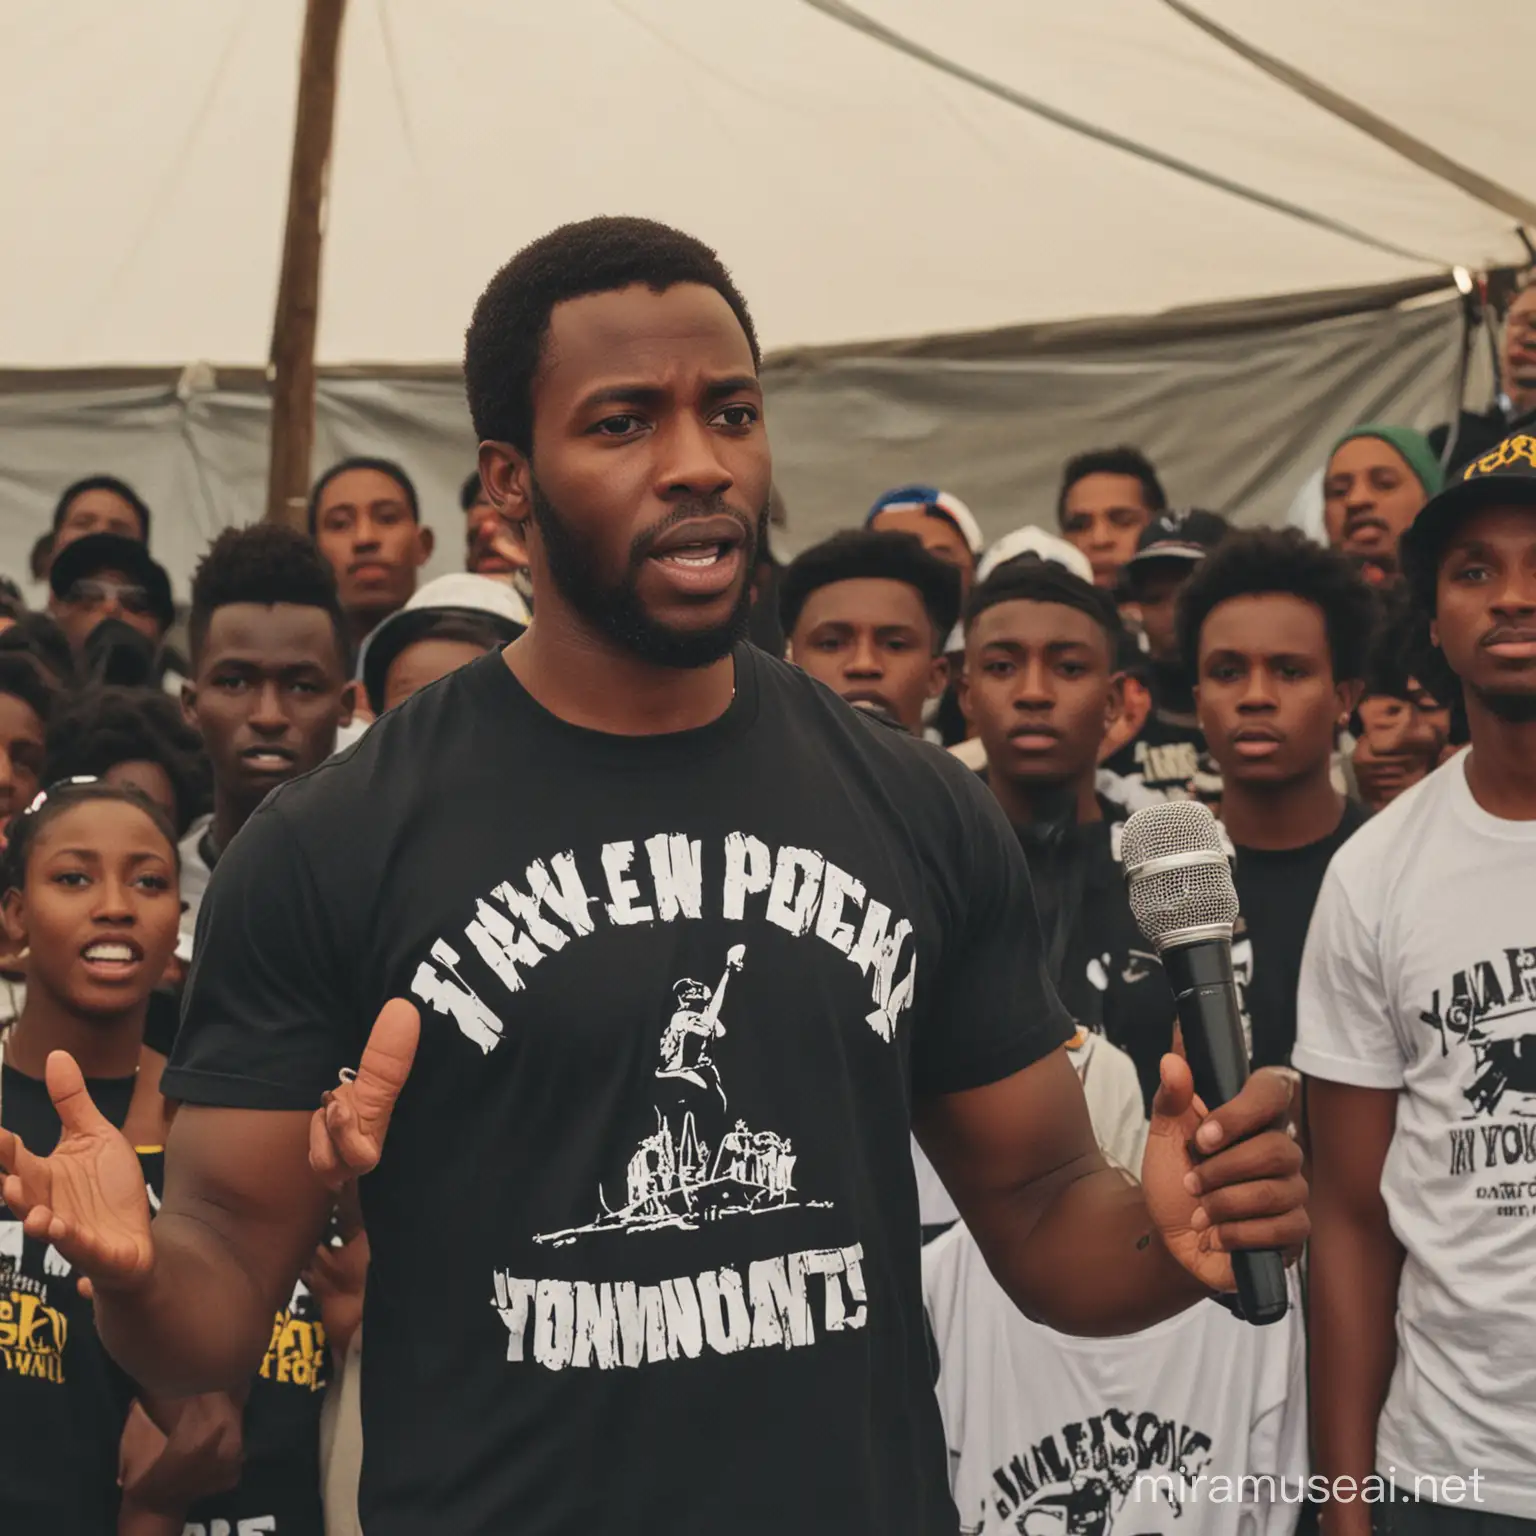 A picture of a black man wearing a t-shirt written TUMANA Nikuletee addressing people holding a microphone in a tent full of black youths